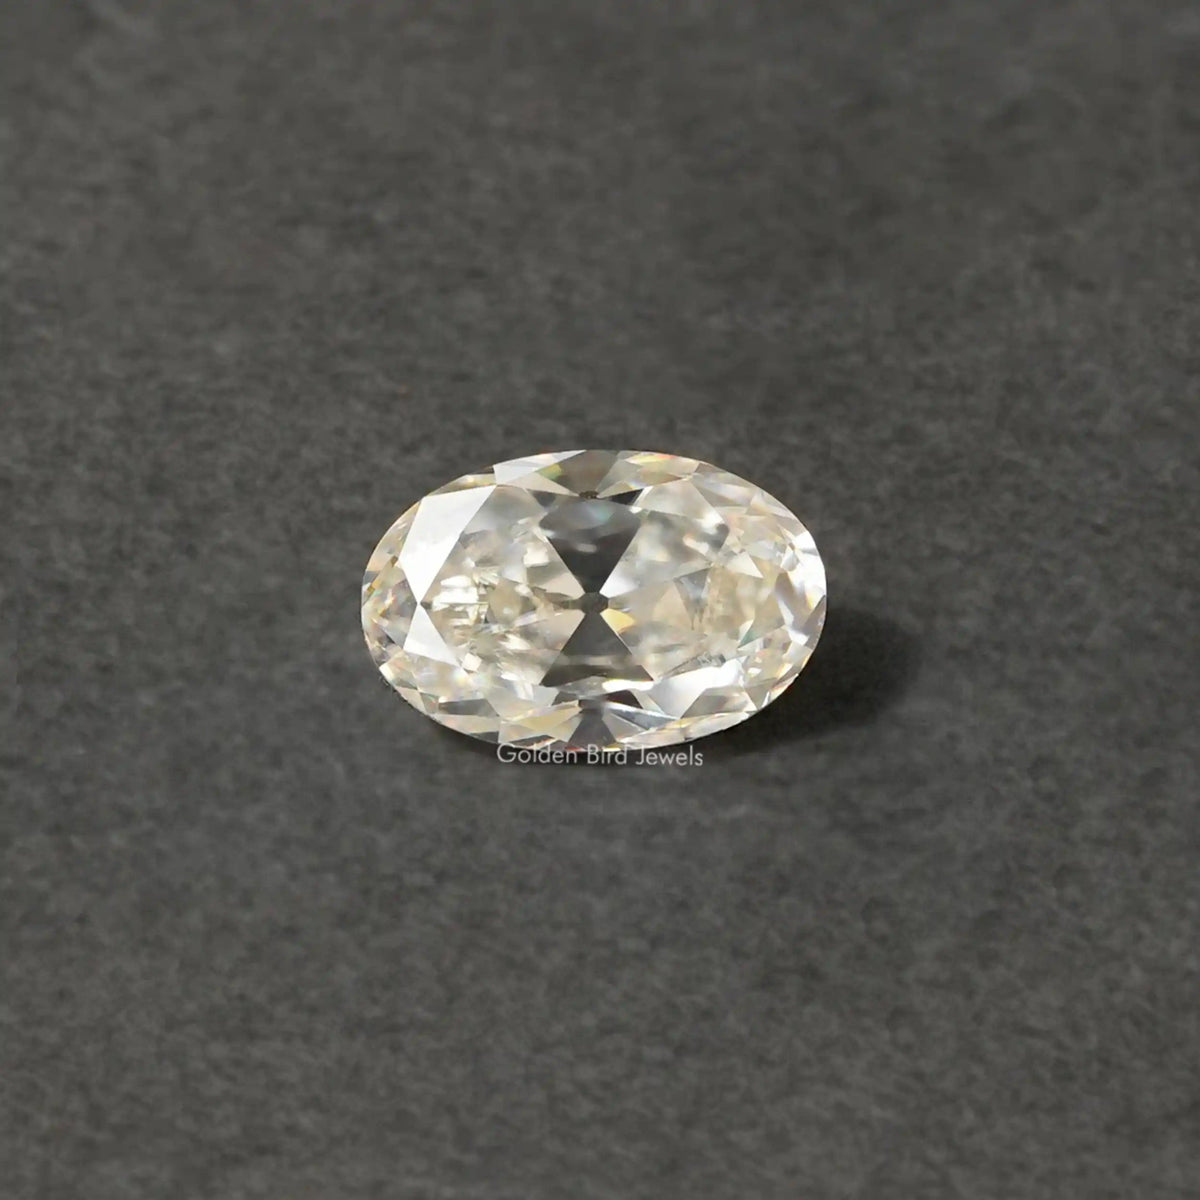 [Front view of old mineoval cut loose moissanite]-[Golden Bird Jewels]